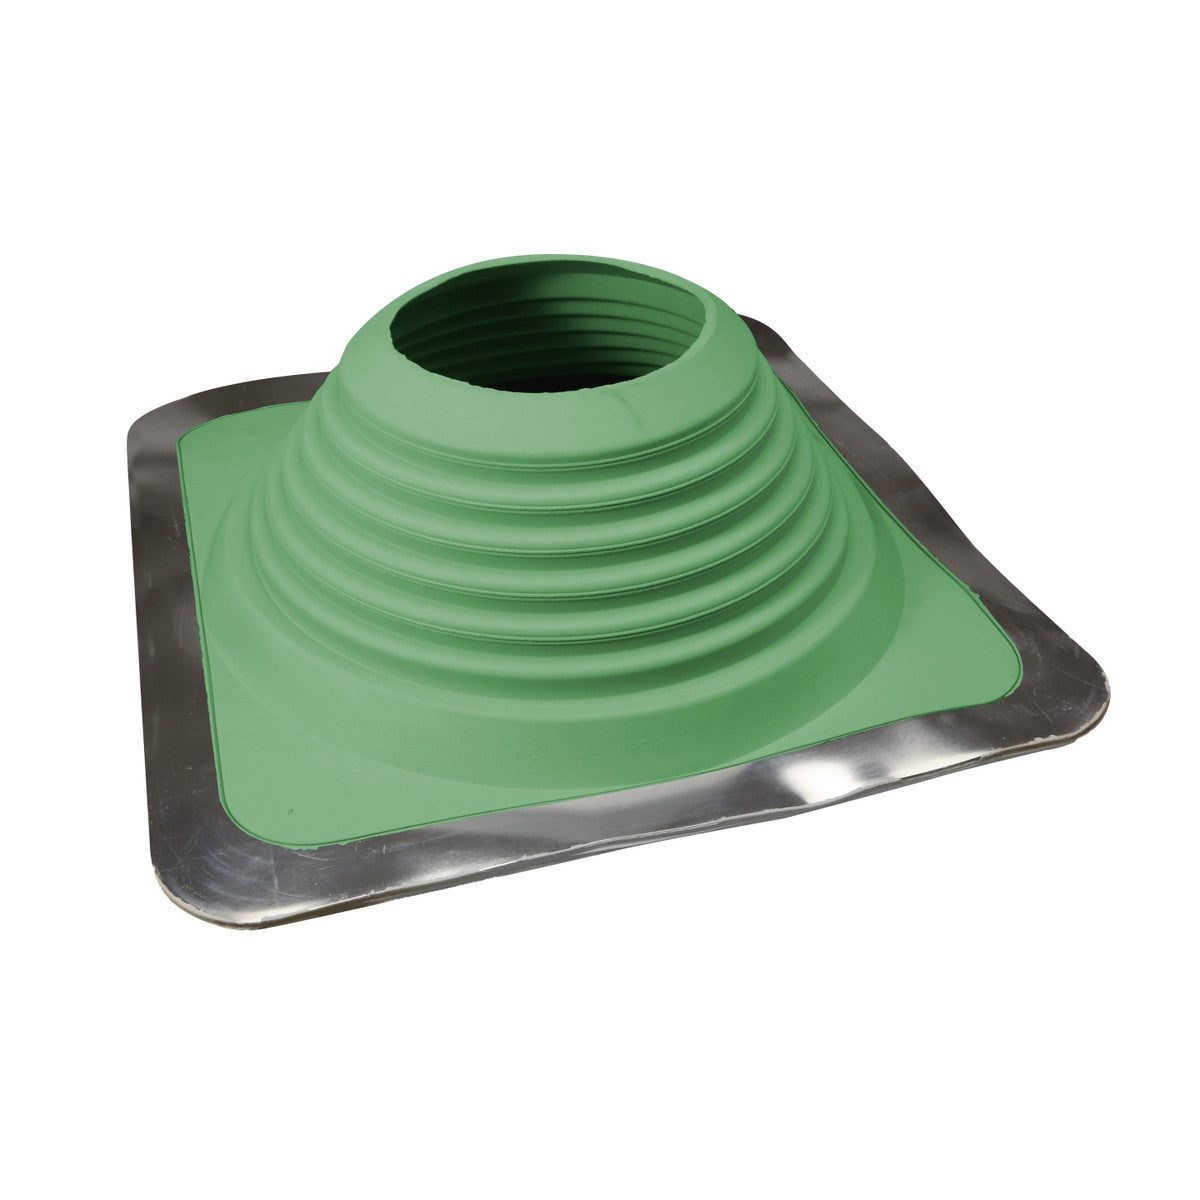 #9 Roofjack Square EPDM Pipe Flashing Boot, Light Green